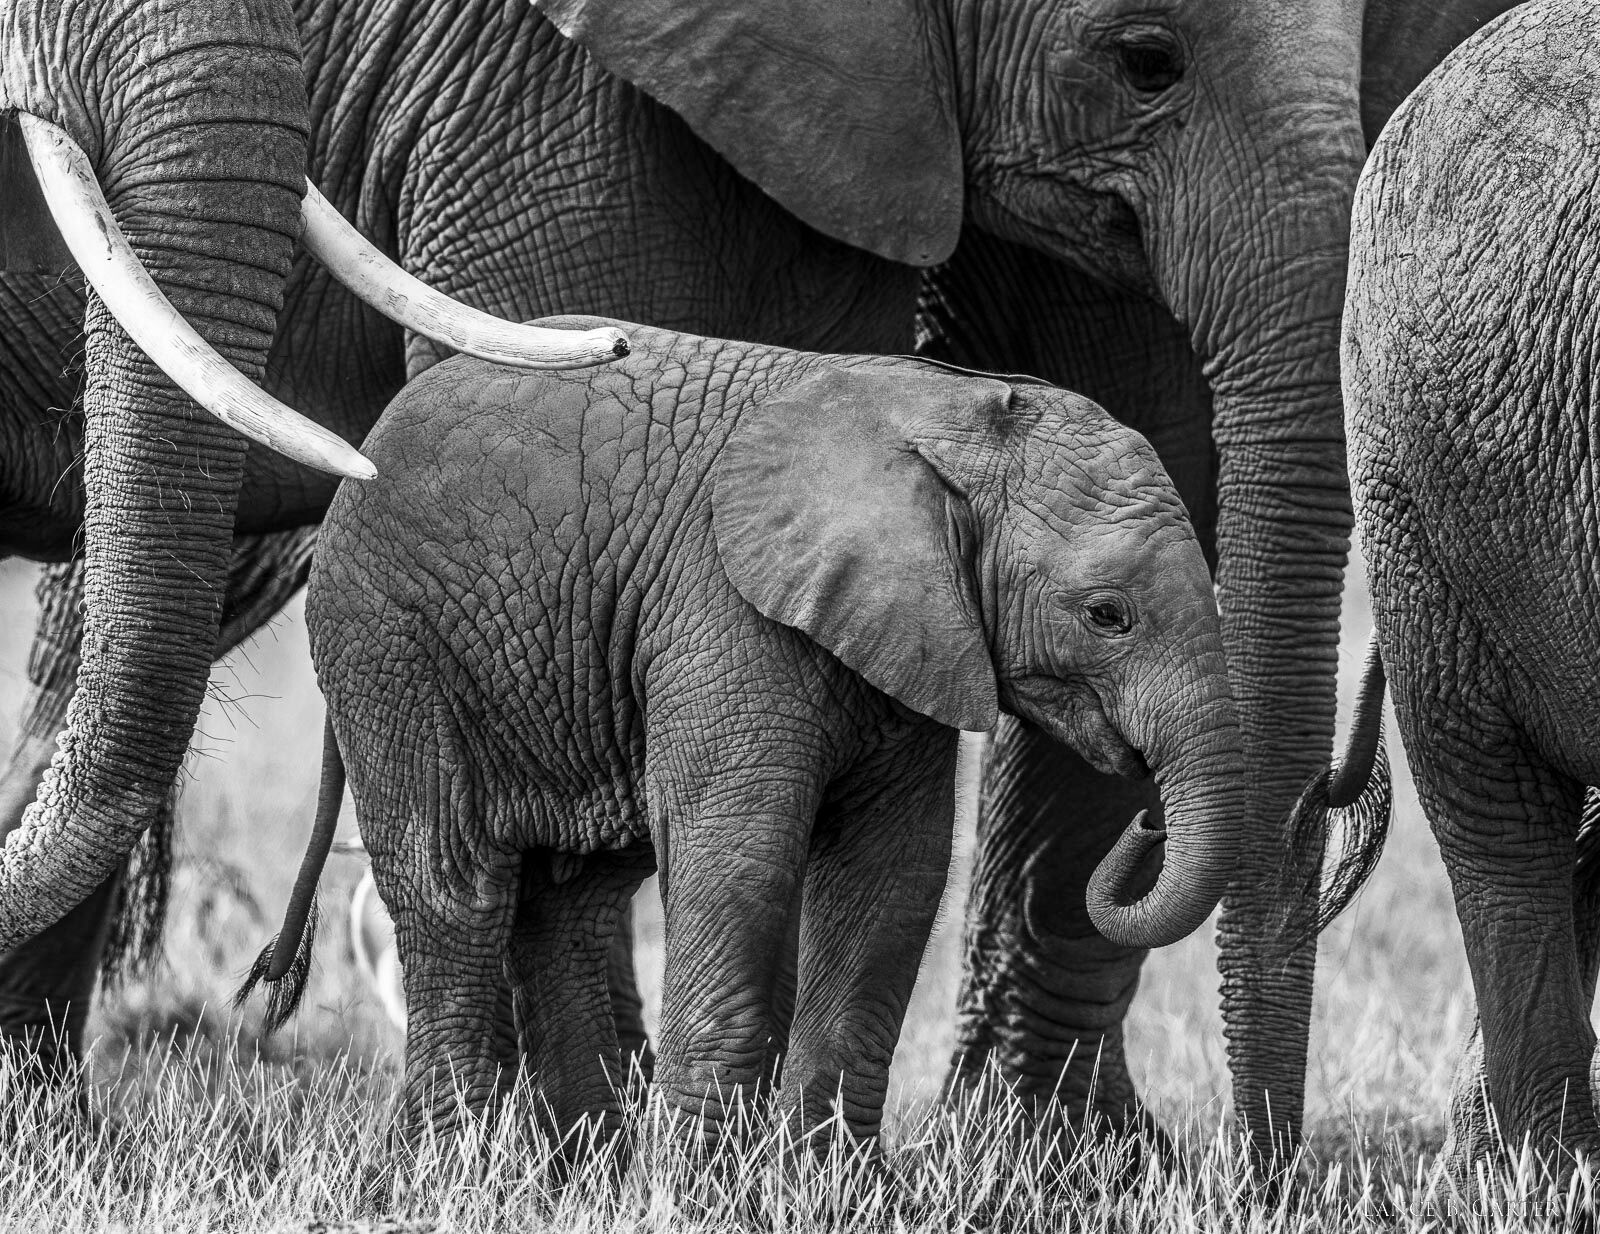 This little elephant happily stays close within the safety of its family unit of females.    The whole world seems to revolve...